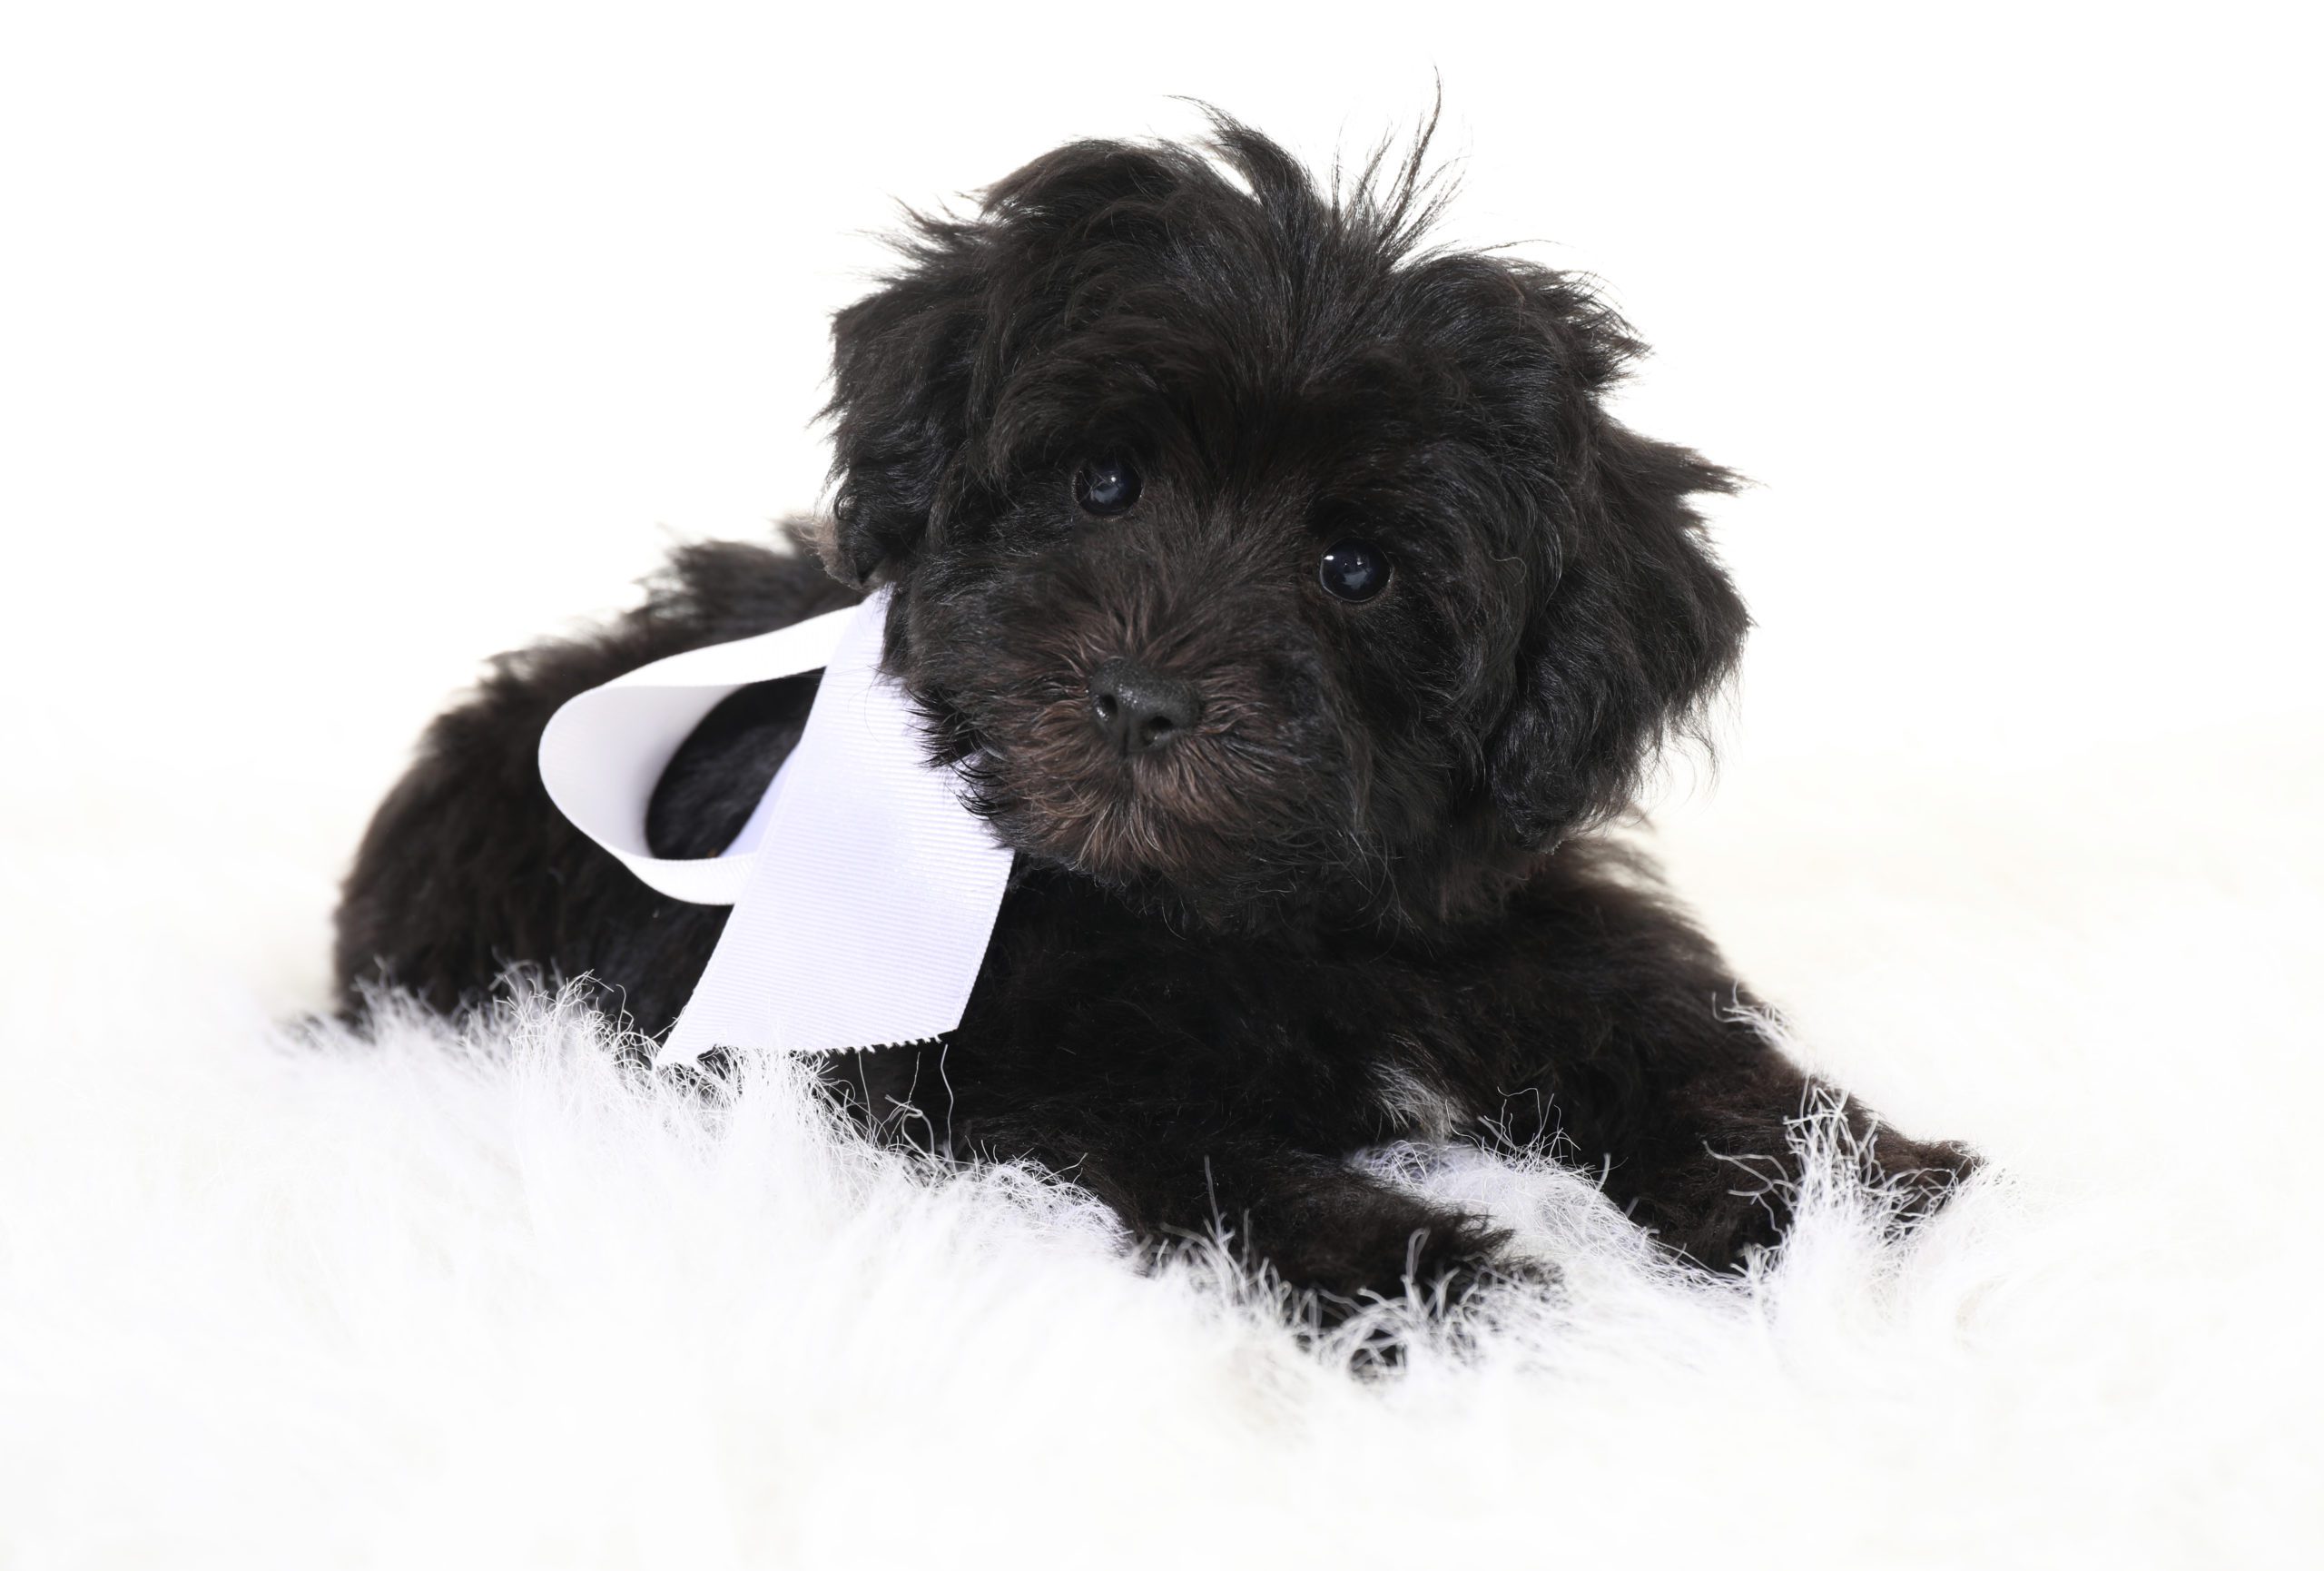 Black golden doodle puppies have the best temperament. They are also allergy friendly and hypoallergenic.